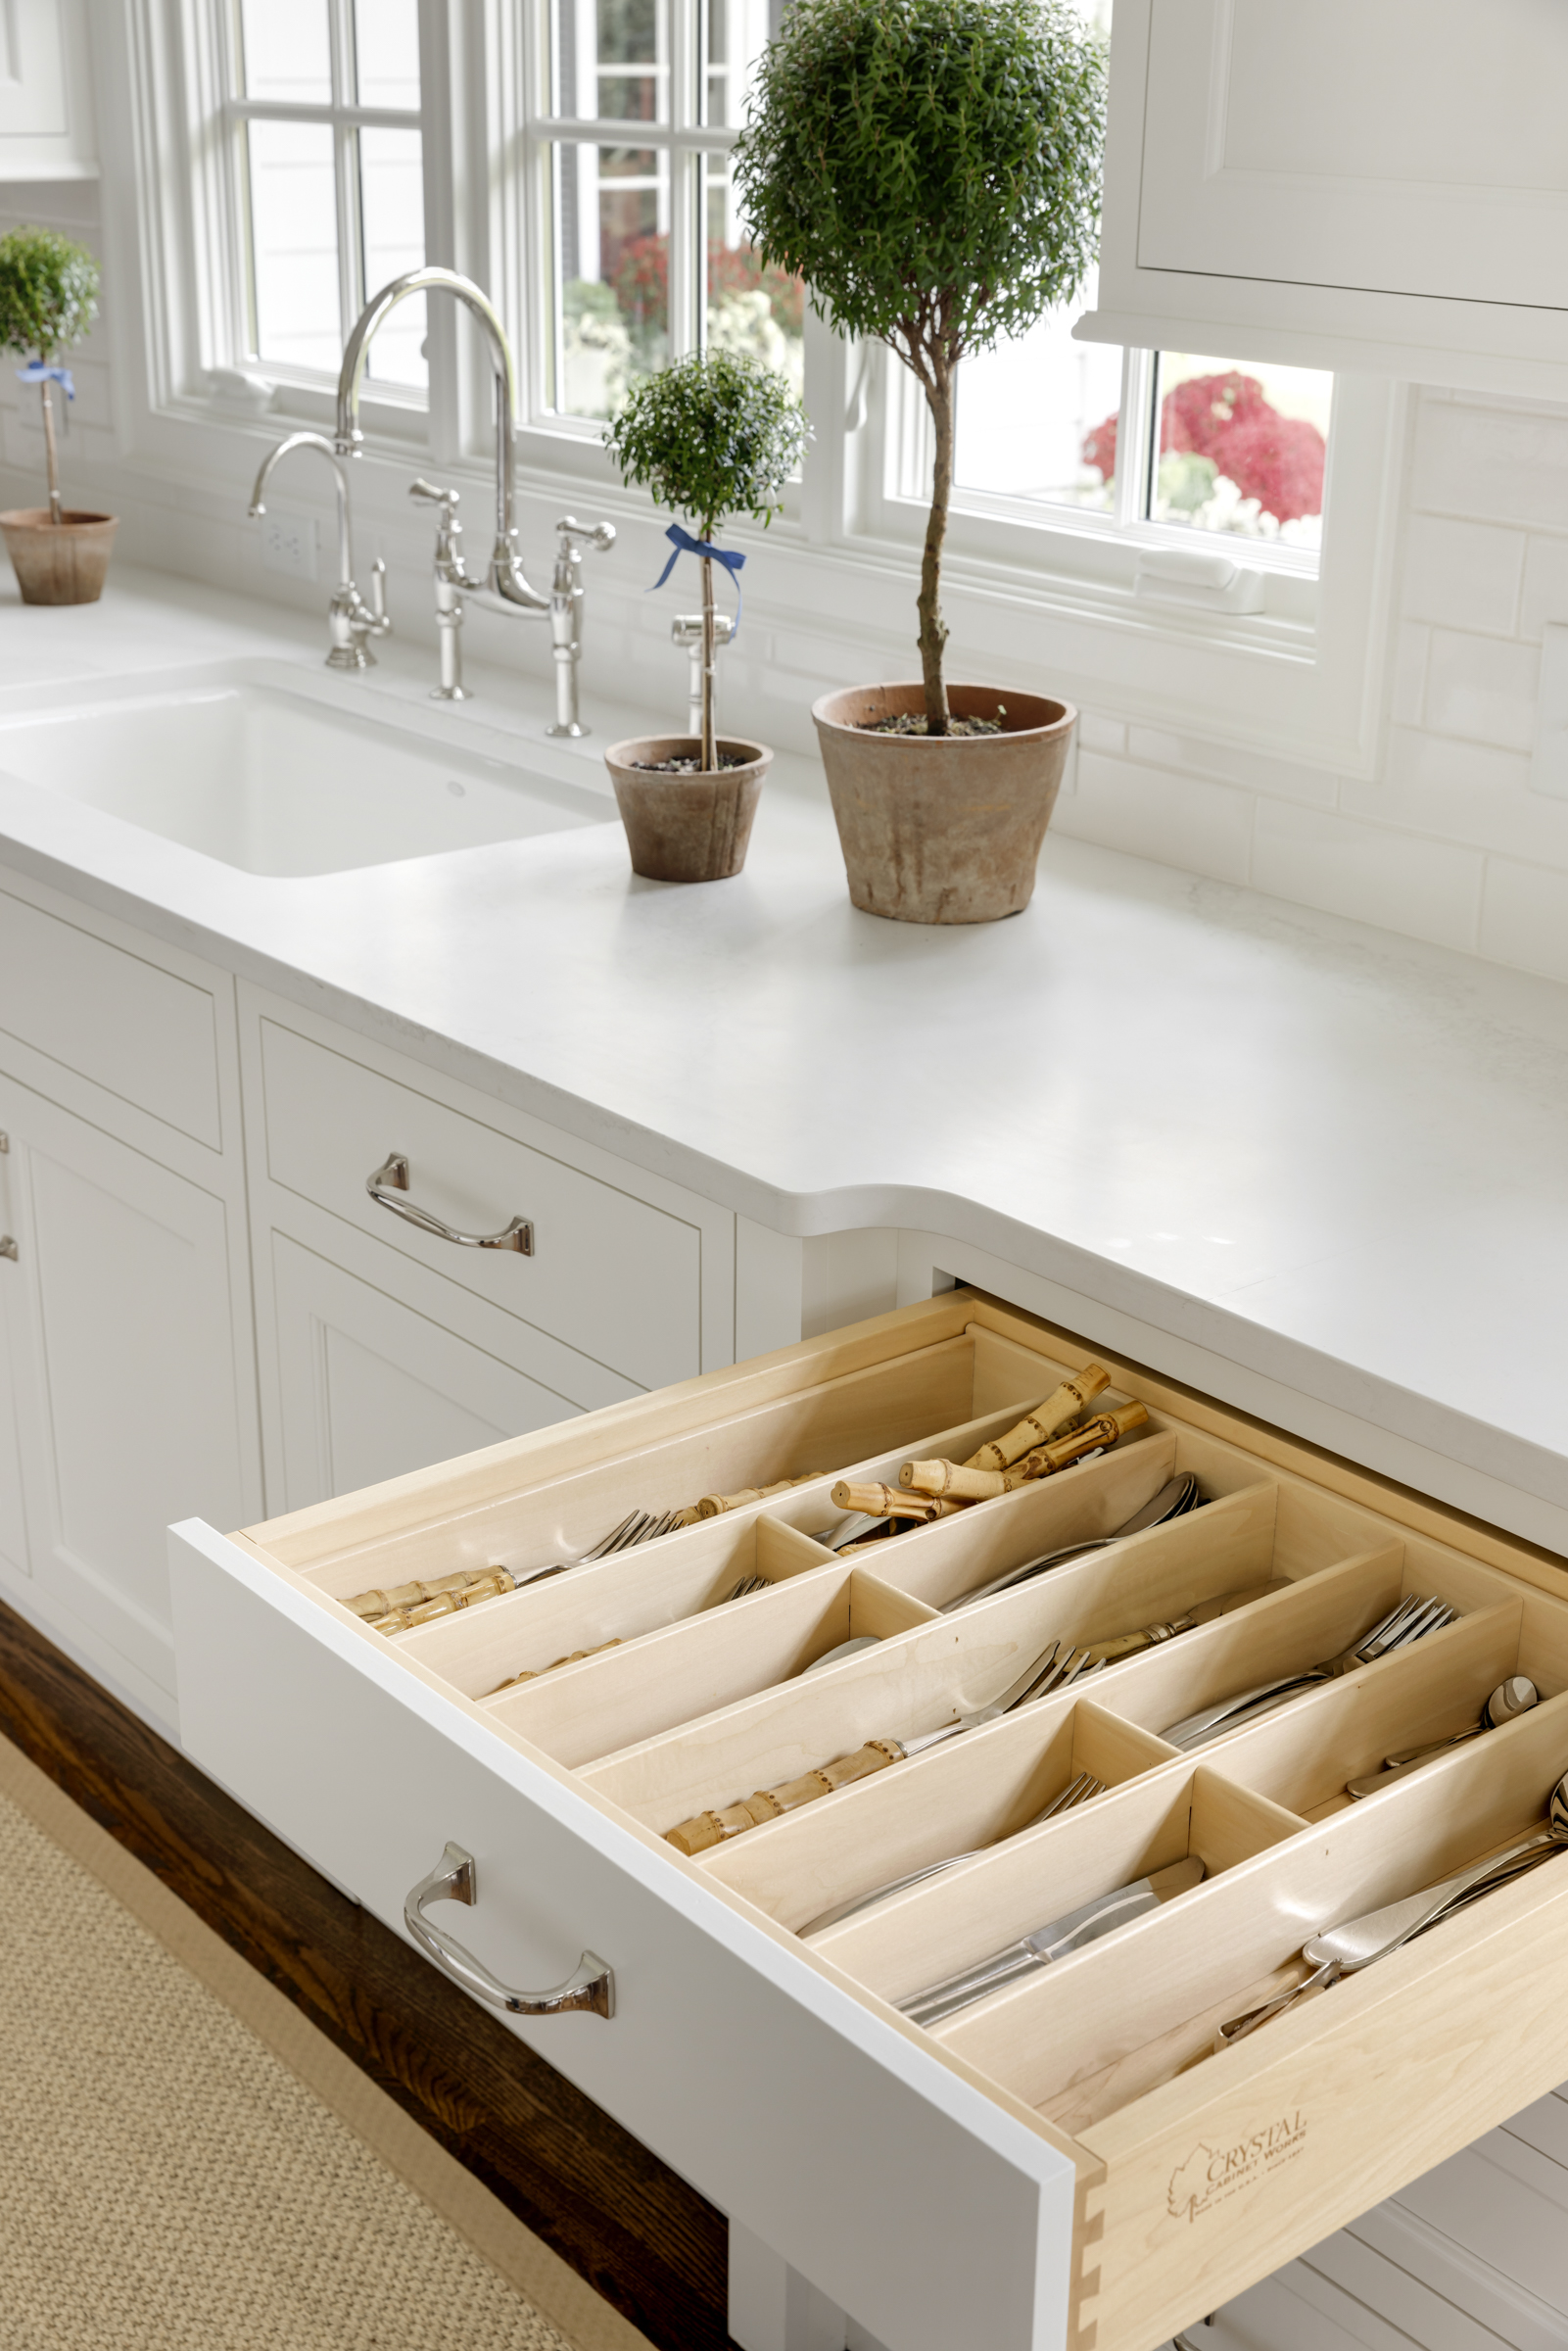 Drawer with silverware storage in kitchen remodel with white cabinets